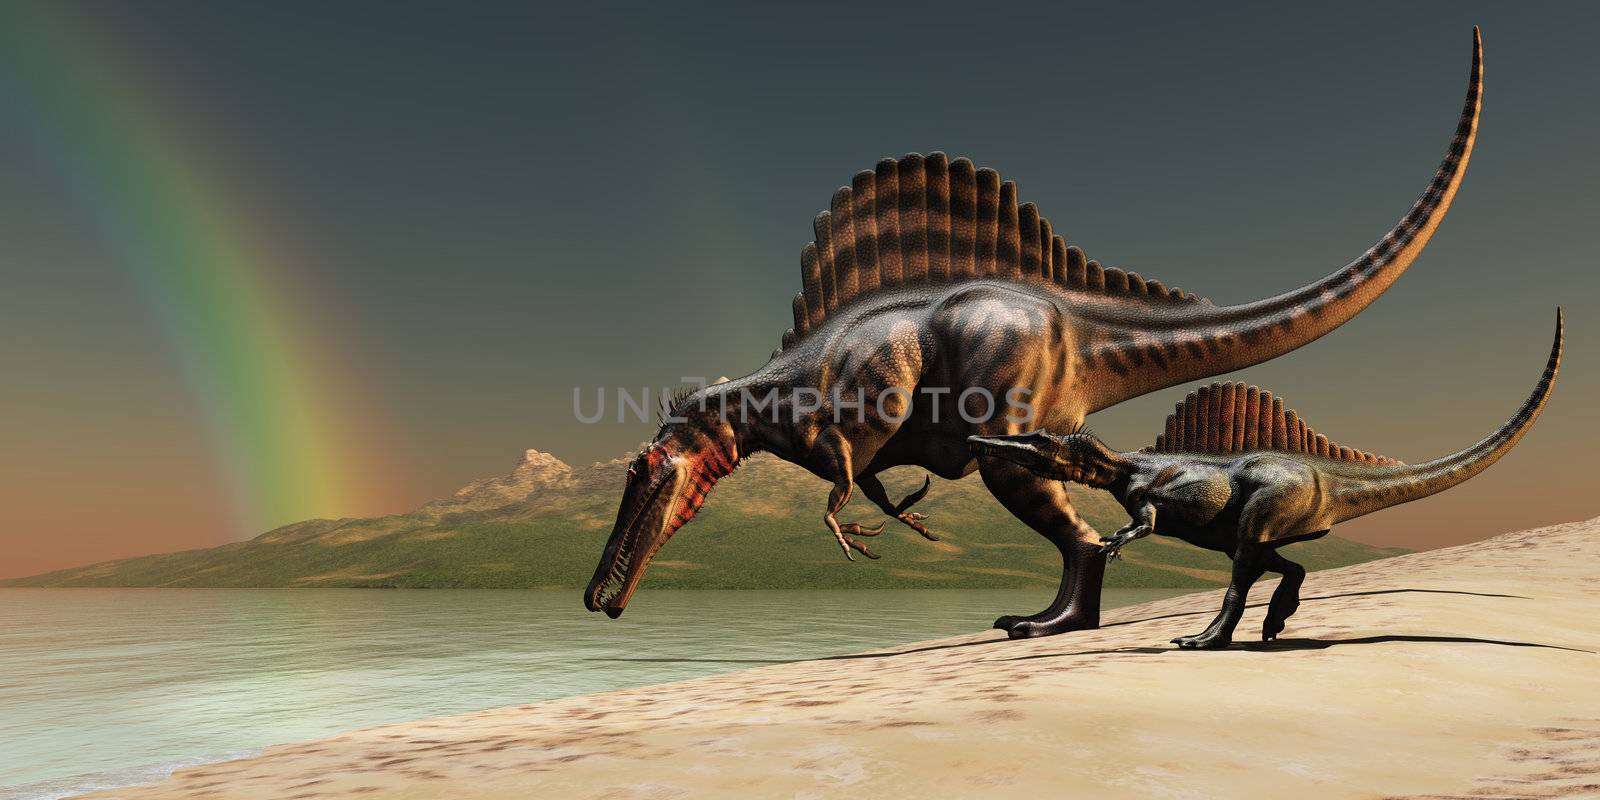 A mother Spinosaurus dinosaur brings her offspring to a lake for a drink of water.